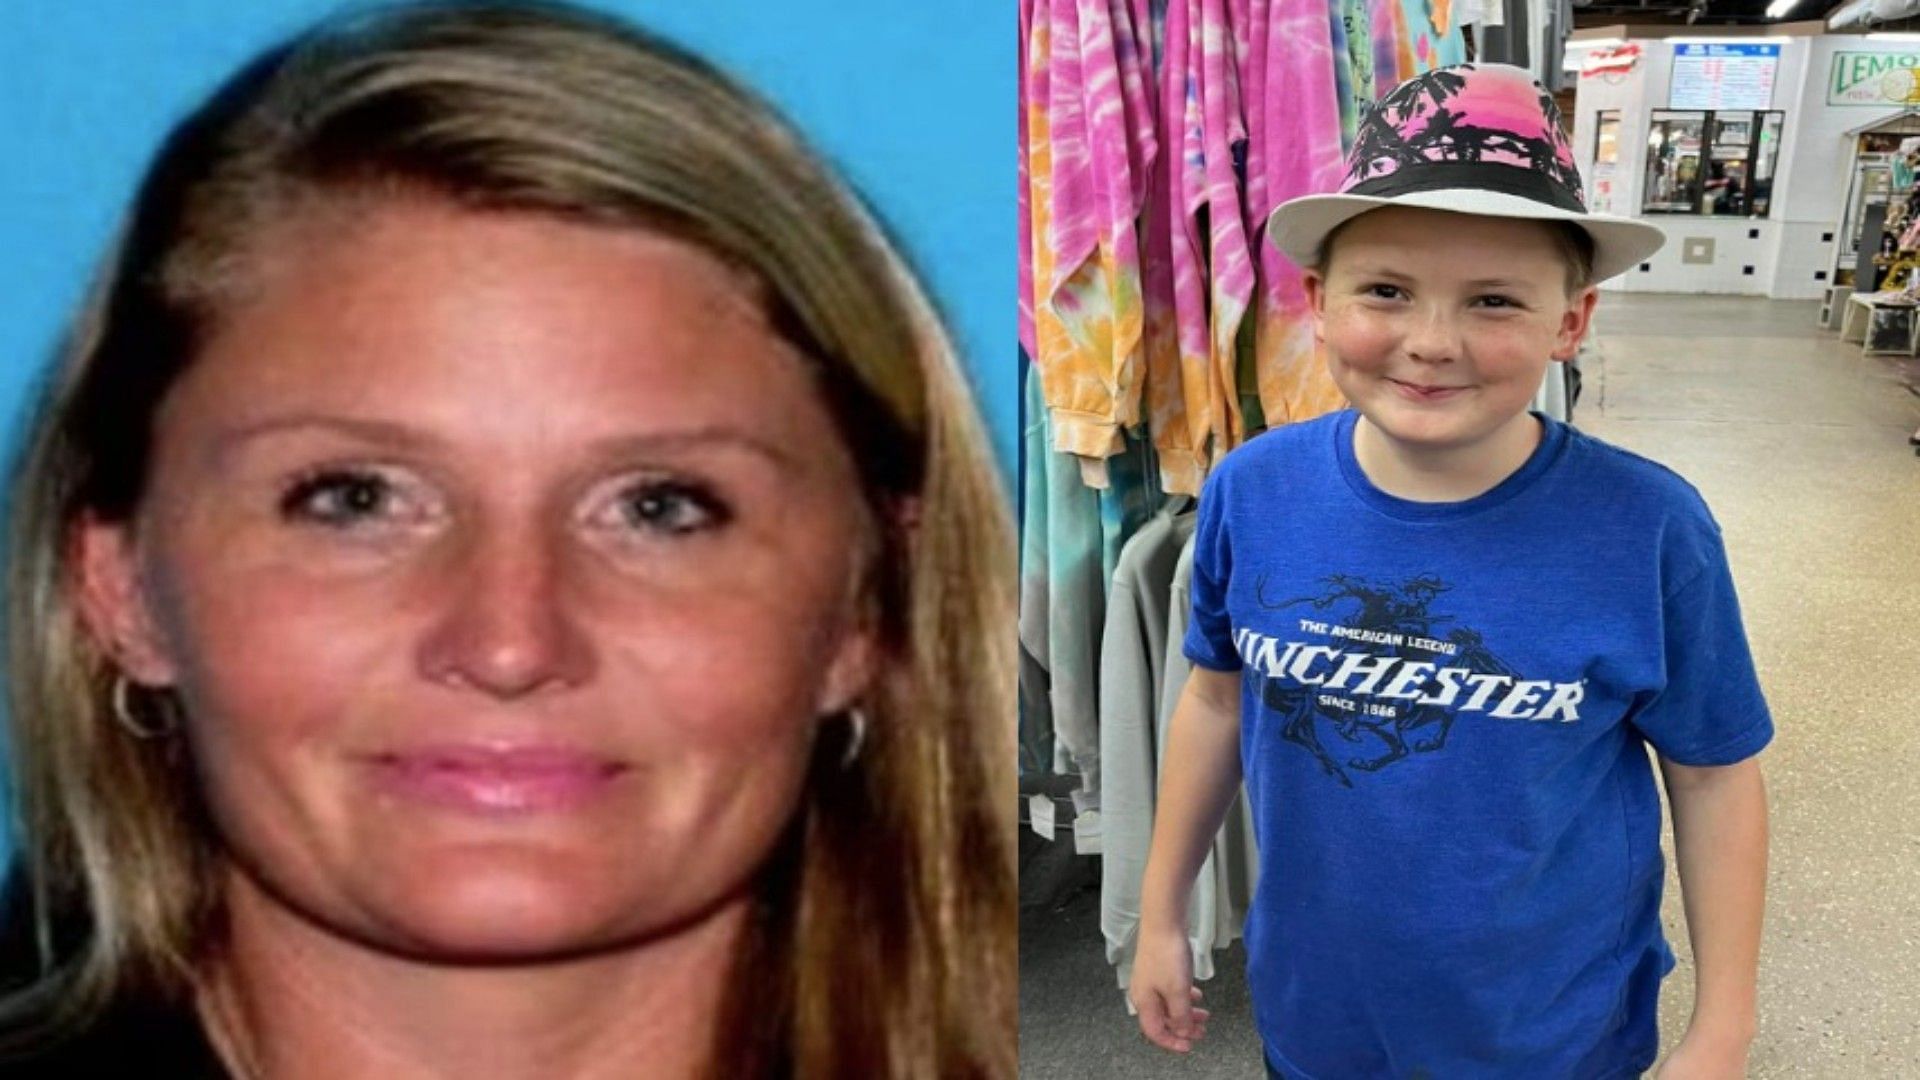 Brandy and Aiden Hutchins (Image via Missing and Murdered Florida group and Race Hutchins/Facebook)